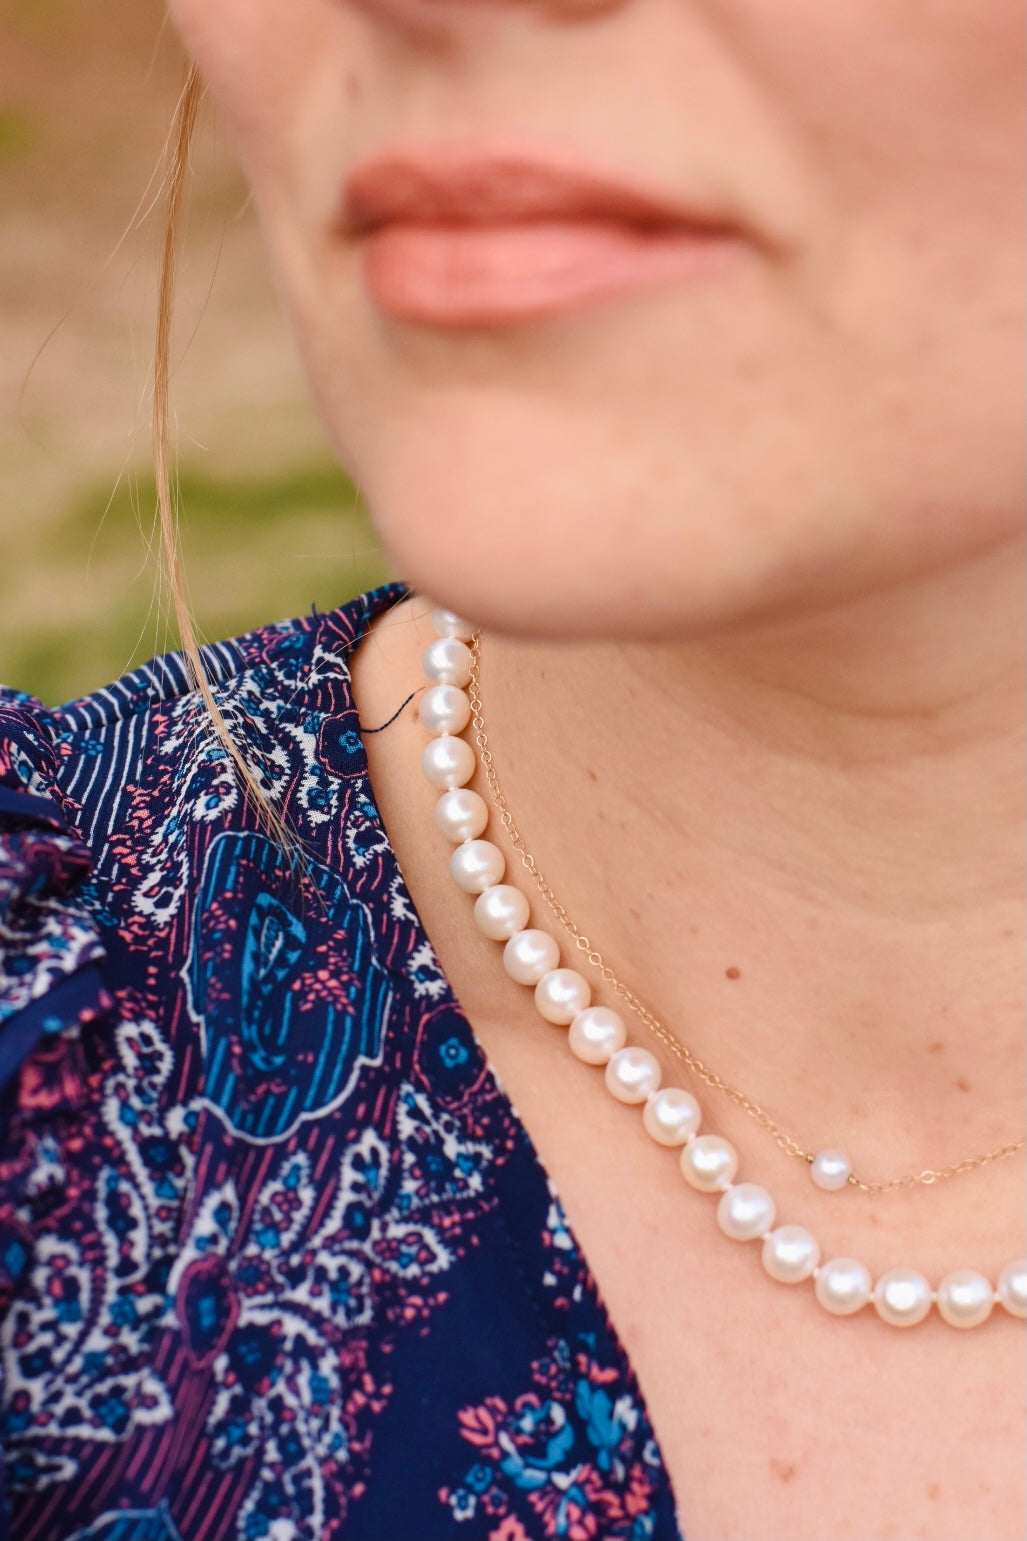 Classic Cultured Pearl Necklace